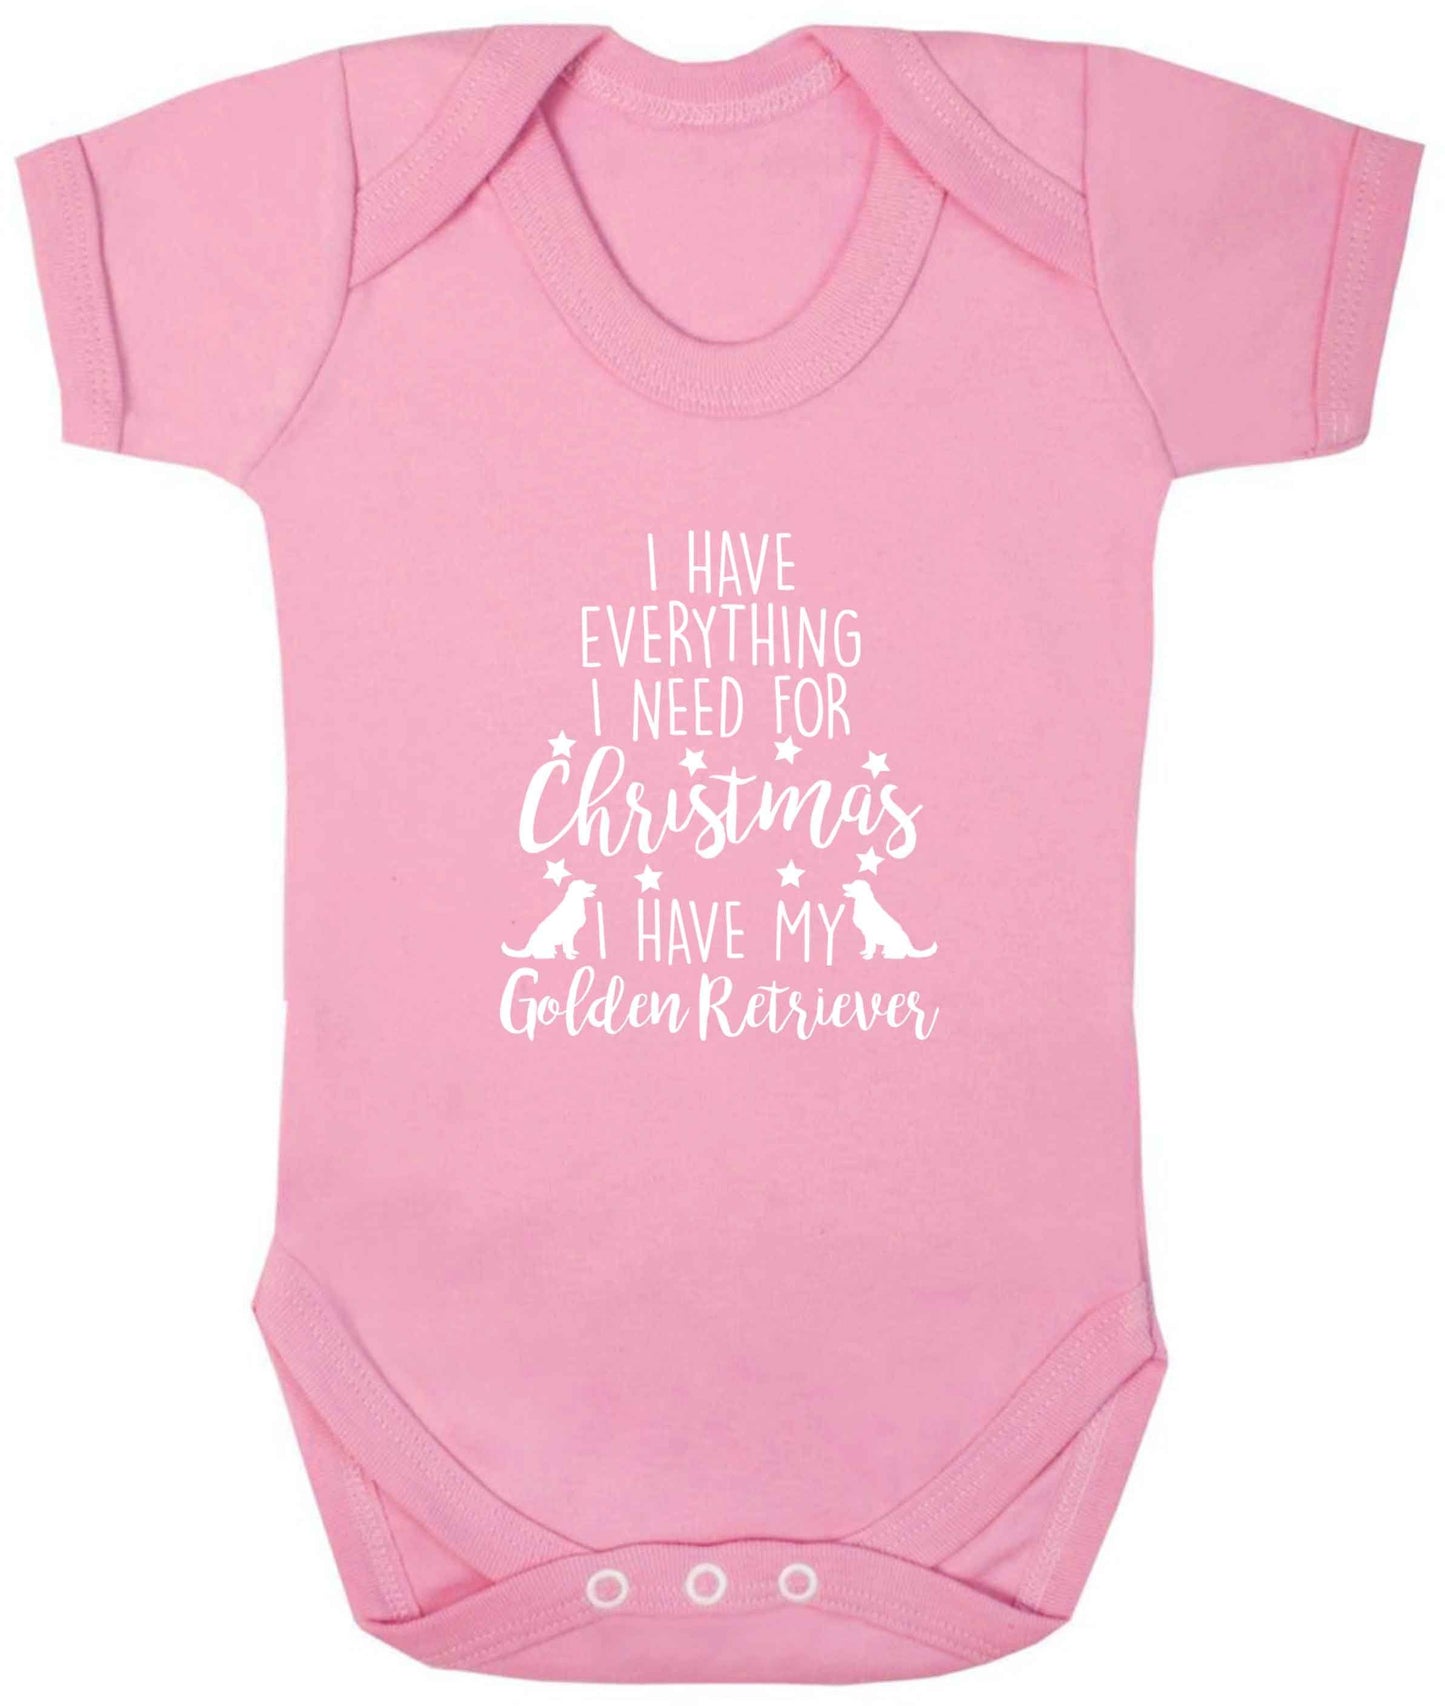 I have everything I need for Christmas I have my golden retriever baby vest pale pink 18-24 months